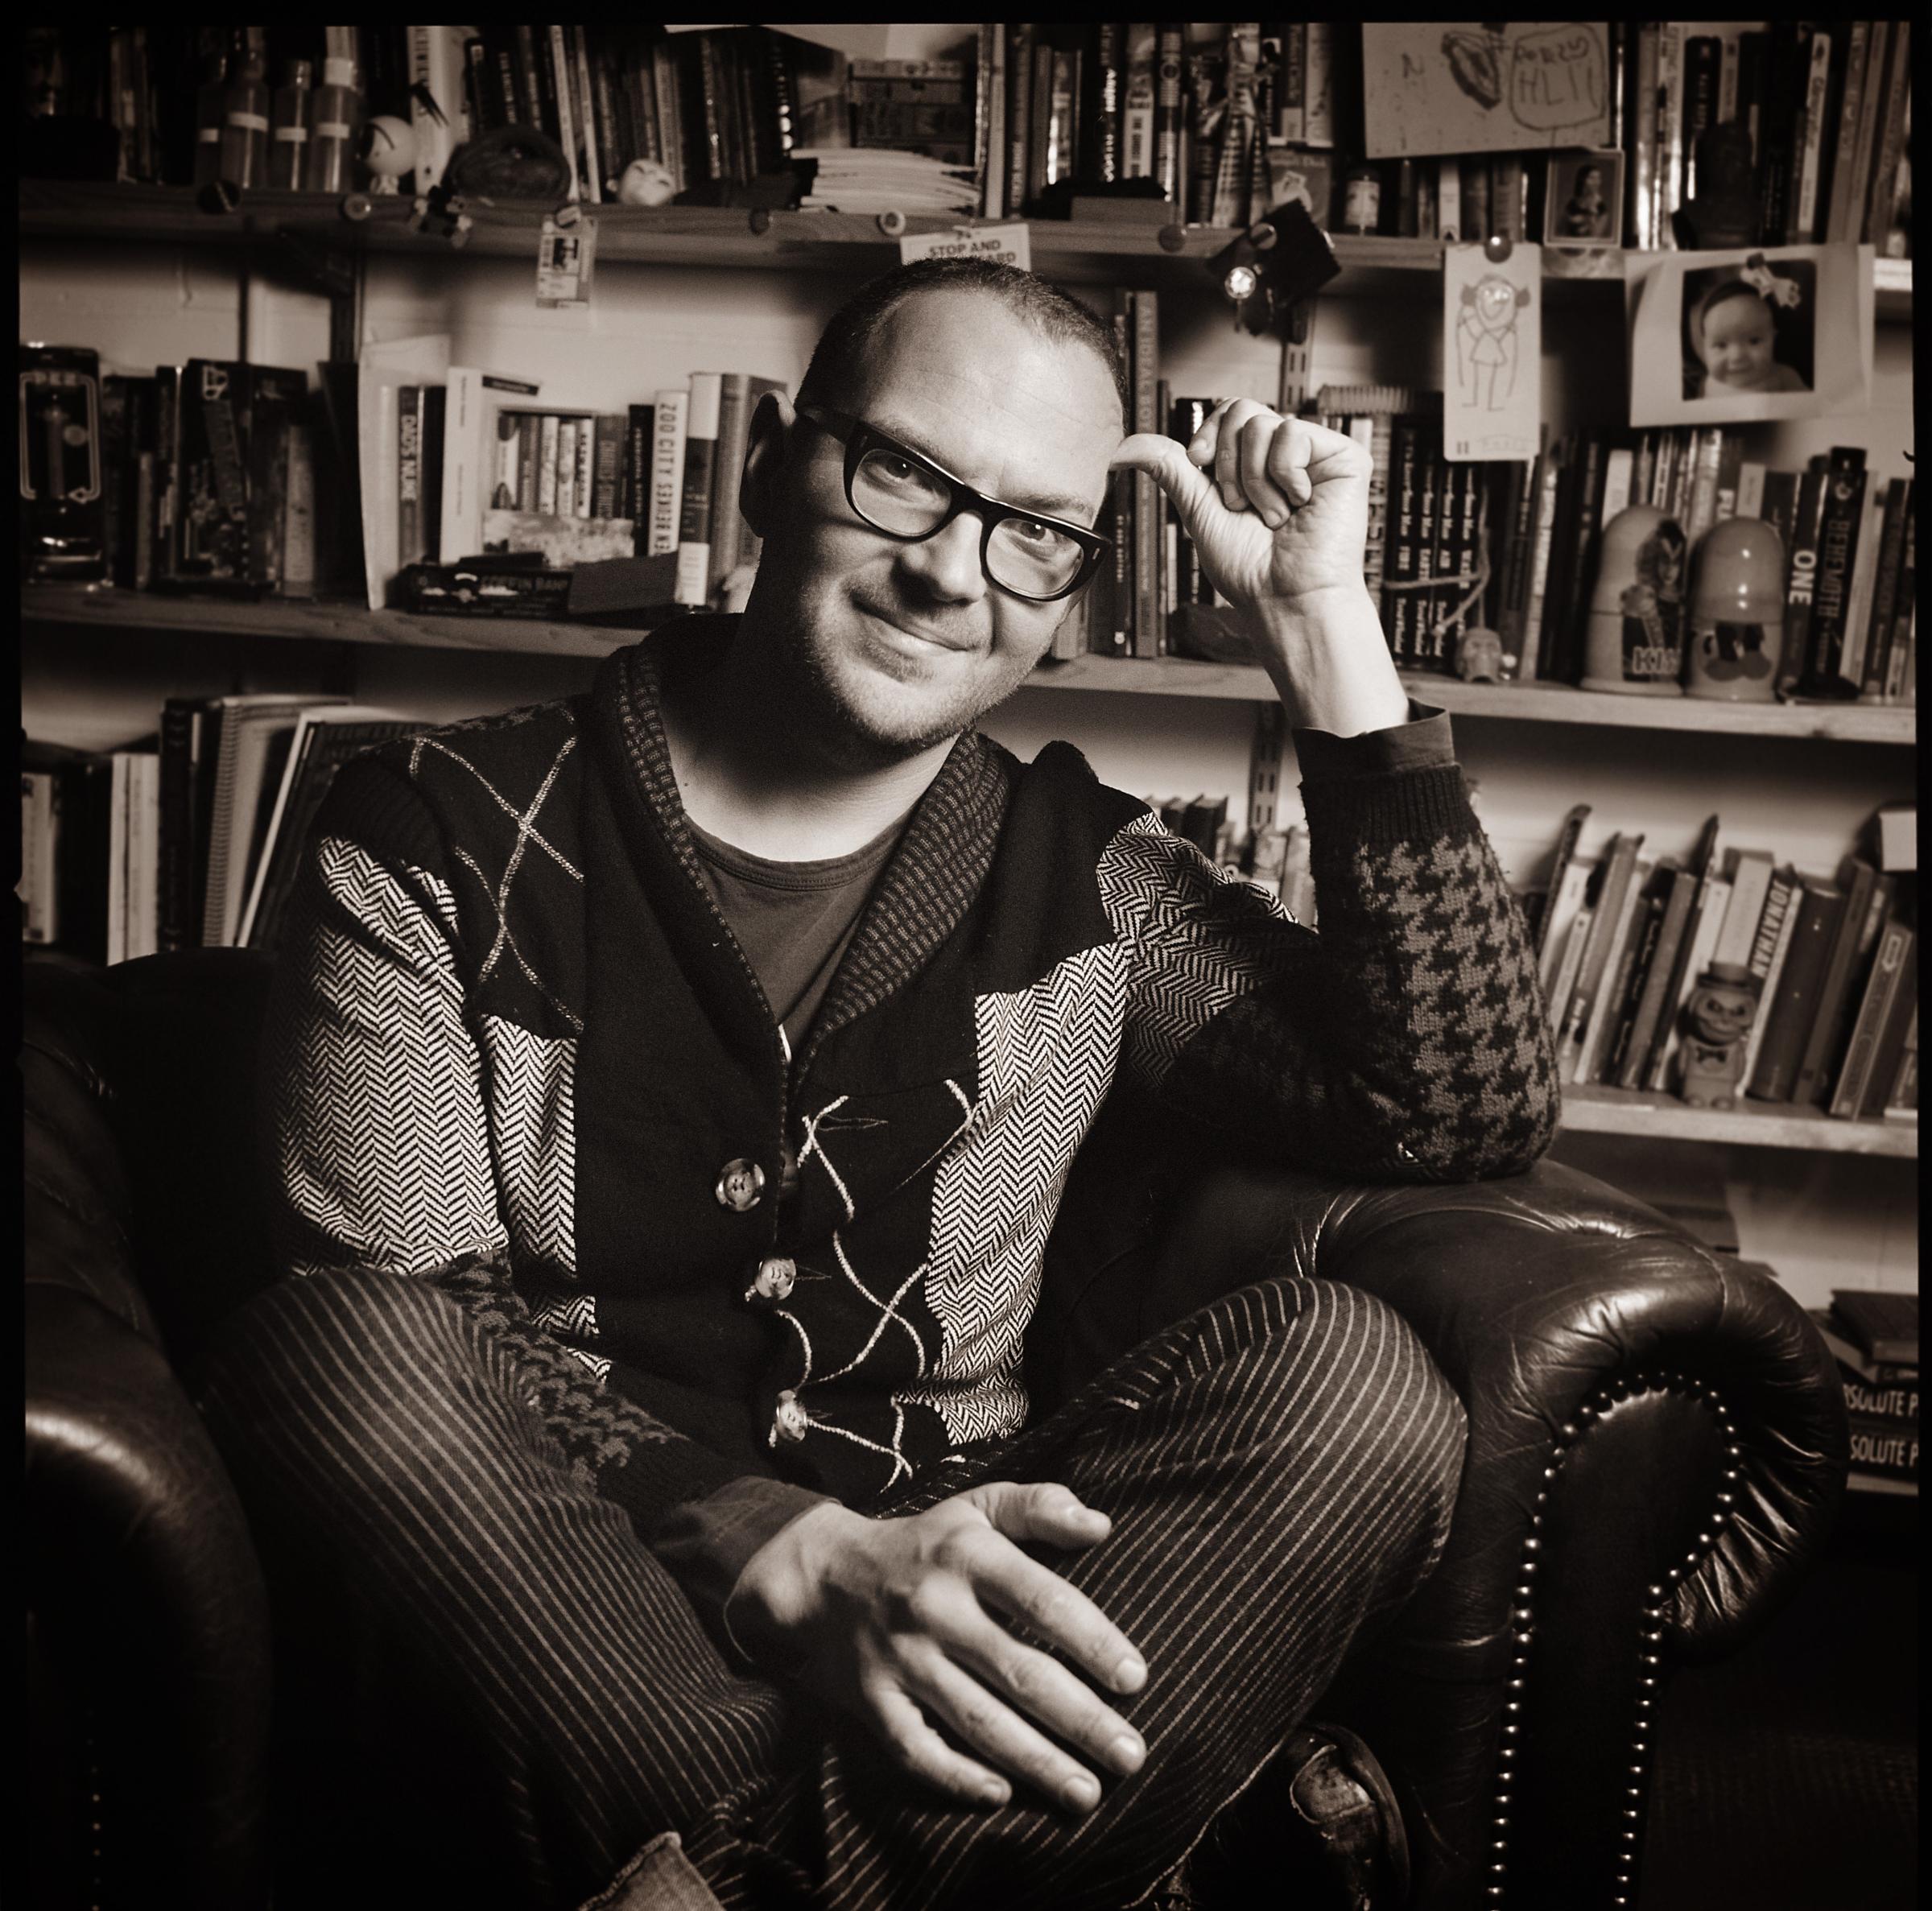 Cory Doctorow (craphound.com) is a science fiction author, activist, journalist and blogger -- the co-editor of Boing Boing (boingboing.net) and the author of young adult novels like PIRATE CINEMA and LITTLE BROTHER and novels for adults like RAPTURE OF THE NERDS and MAKERS. He is the former European director of the Electronic Frontier Foundation and co-founded the UK Open Rights Group. Born in Toronto, Canada, he now lives in London and is pictured here in his office.